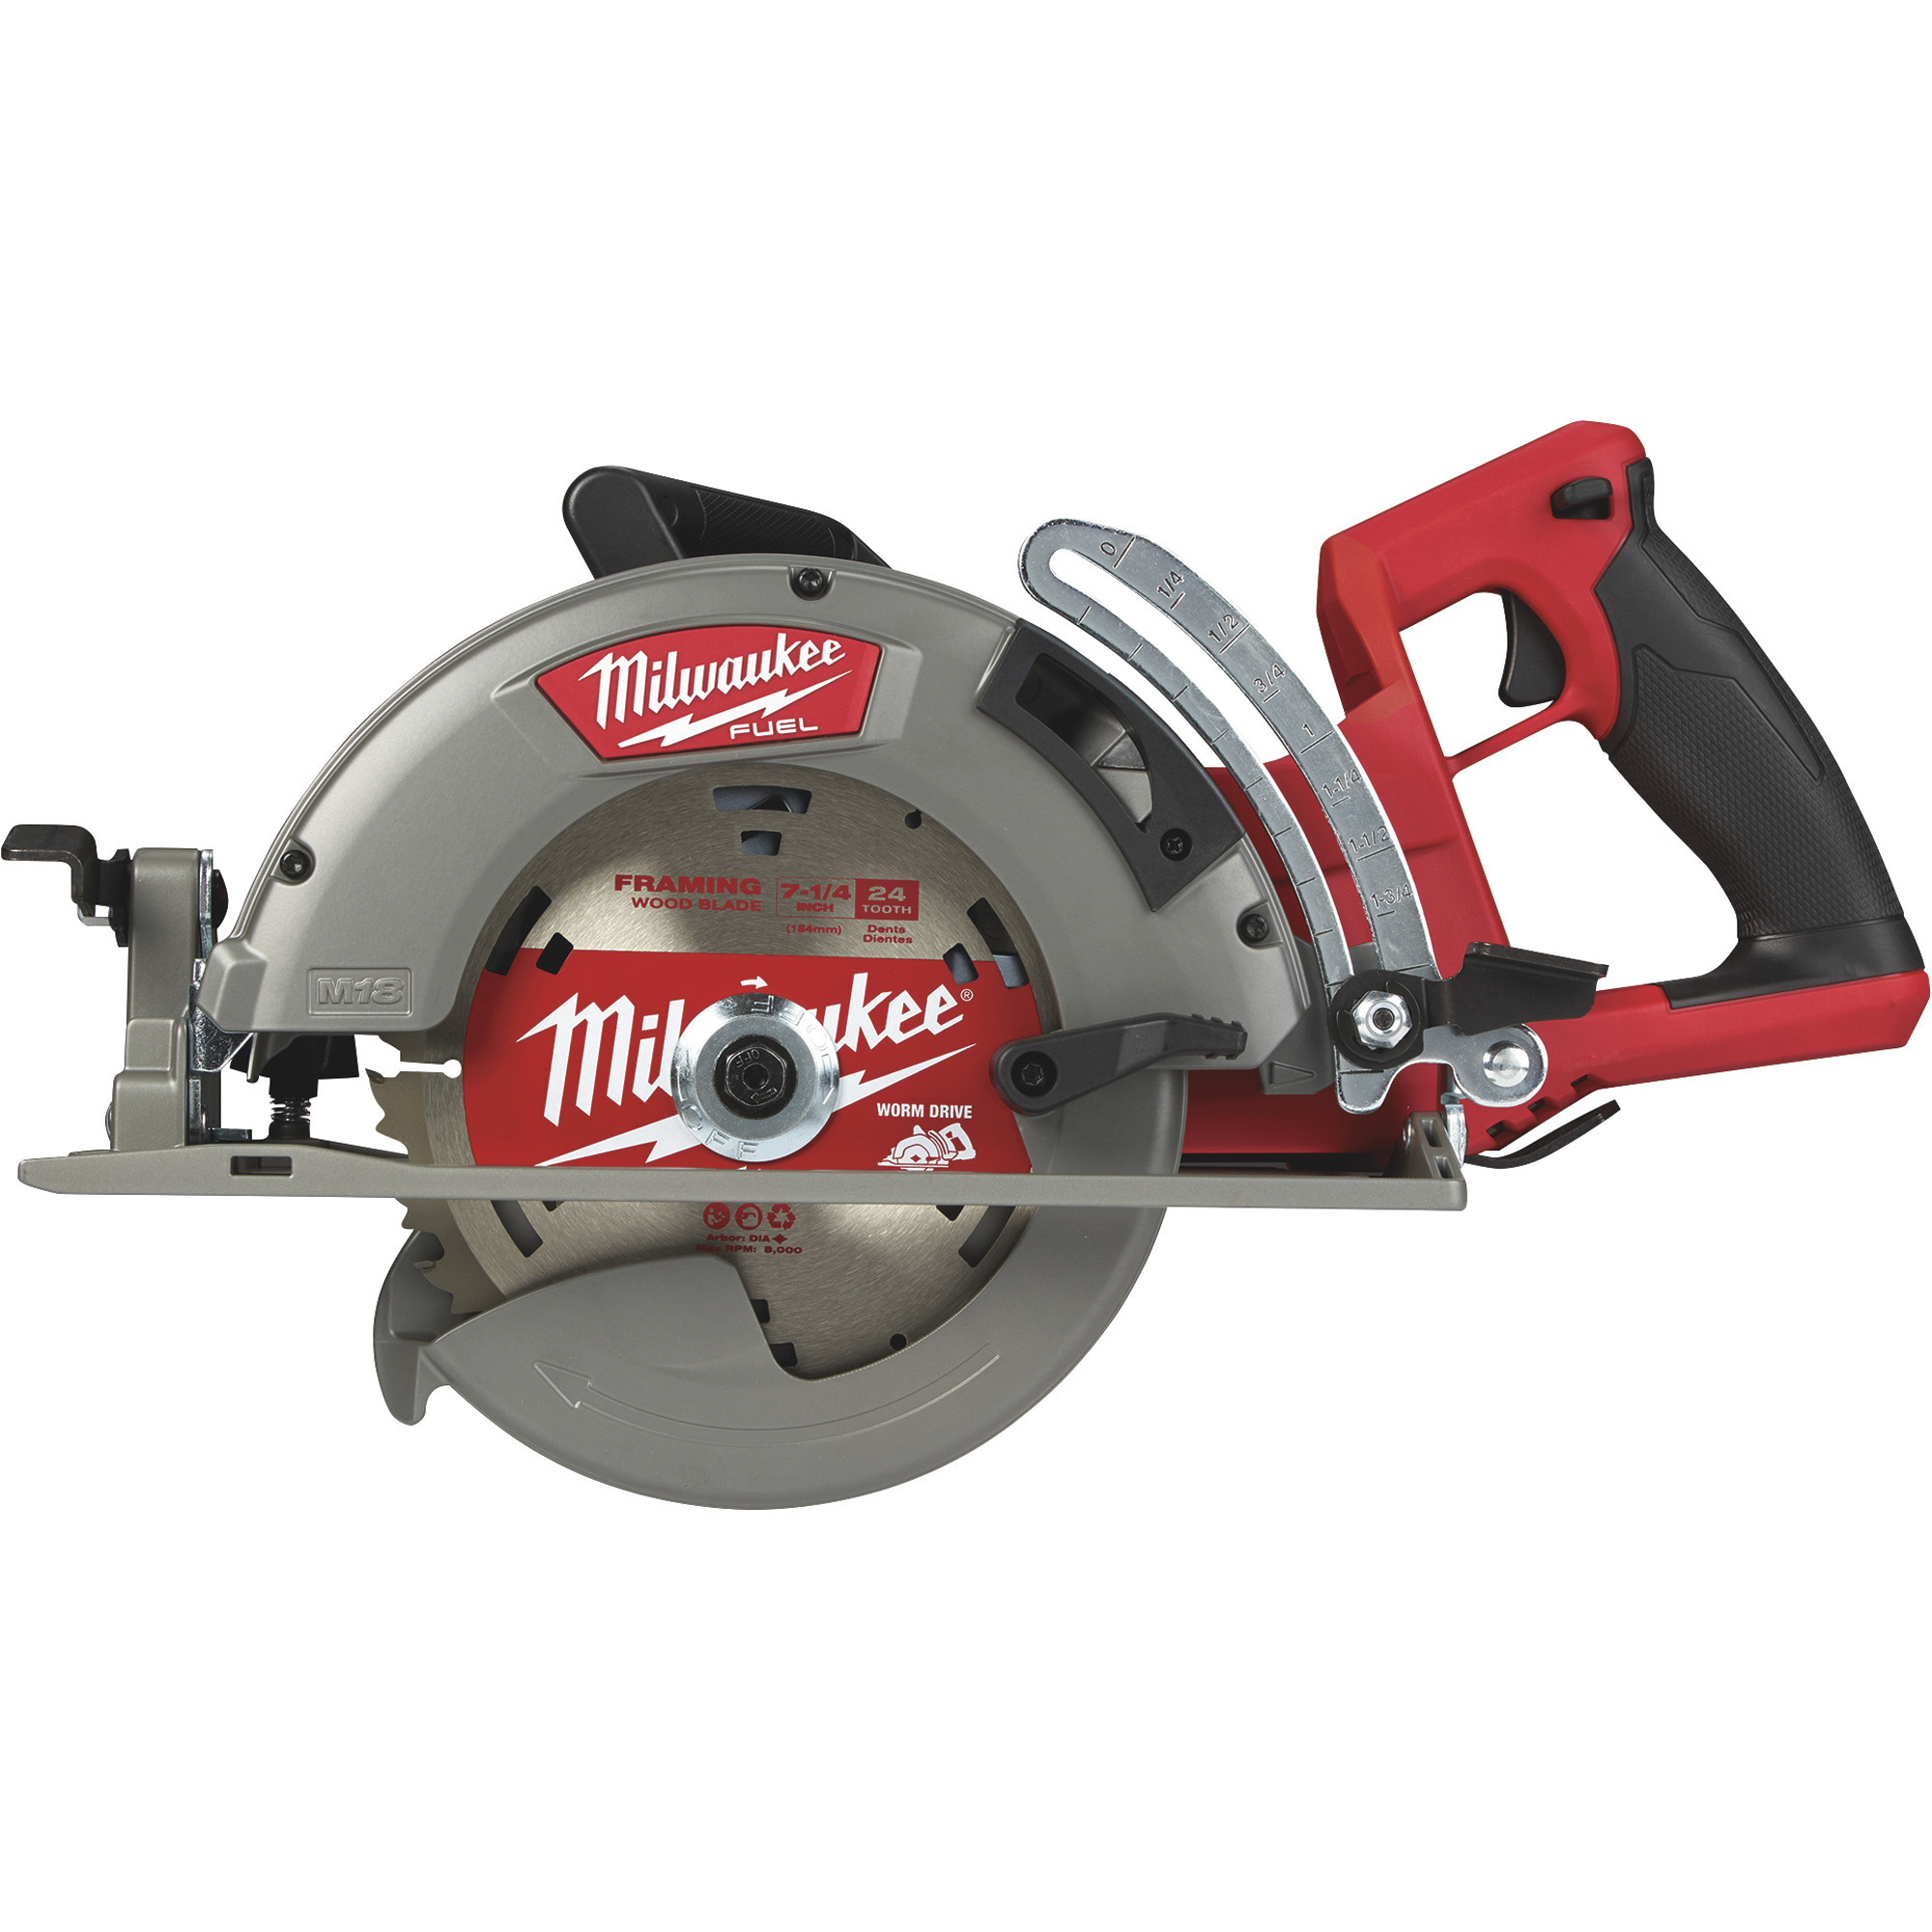 Milwaukee M18 FUEL Rear Handle Circular Saw - Tool Only, 7 1/4Inch, Model 2830-20